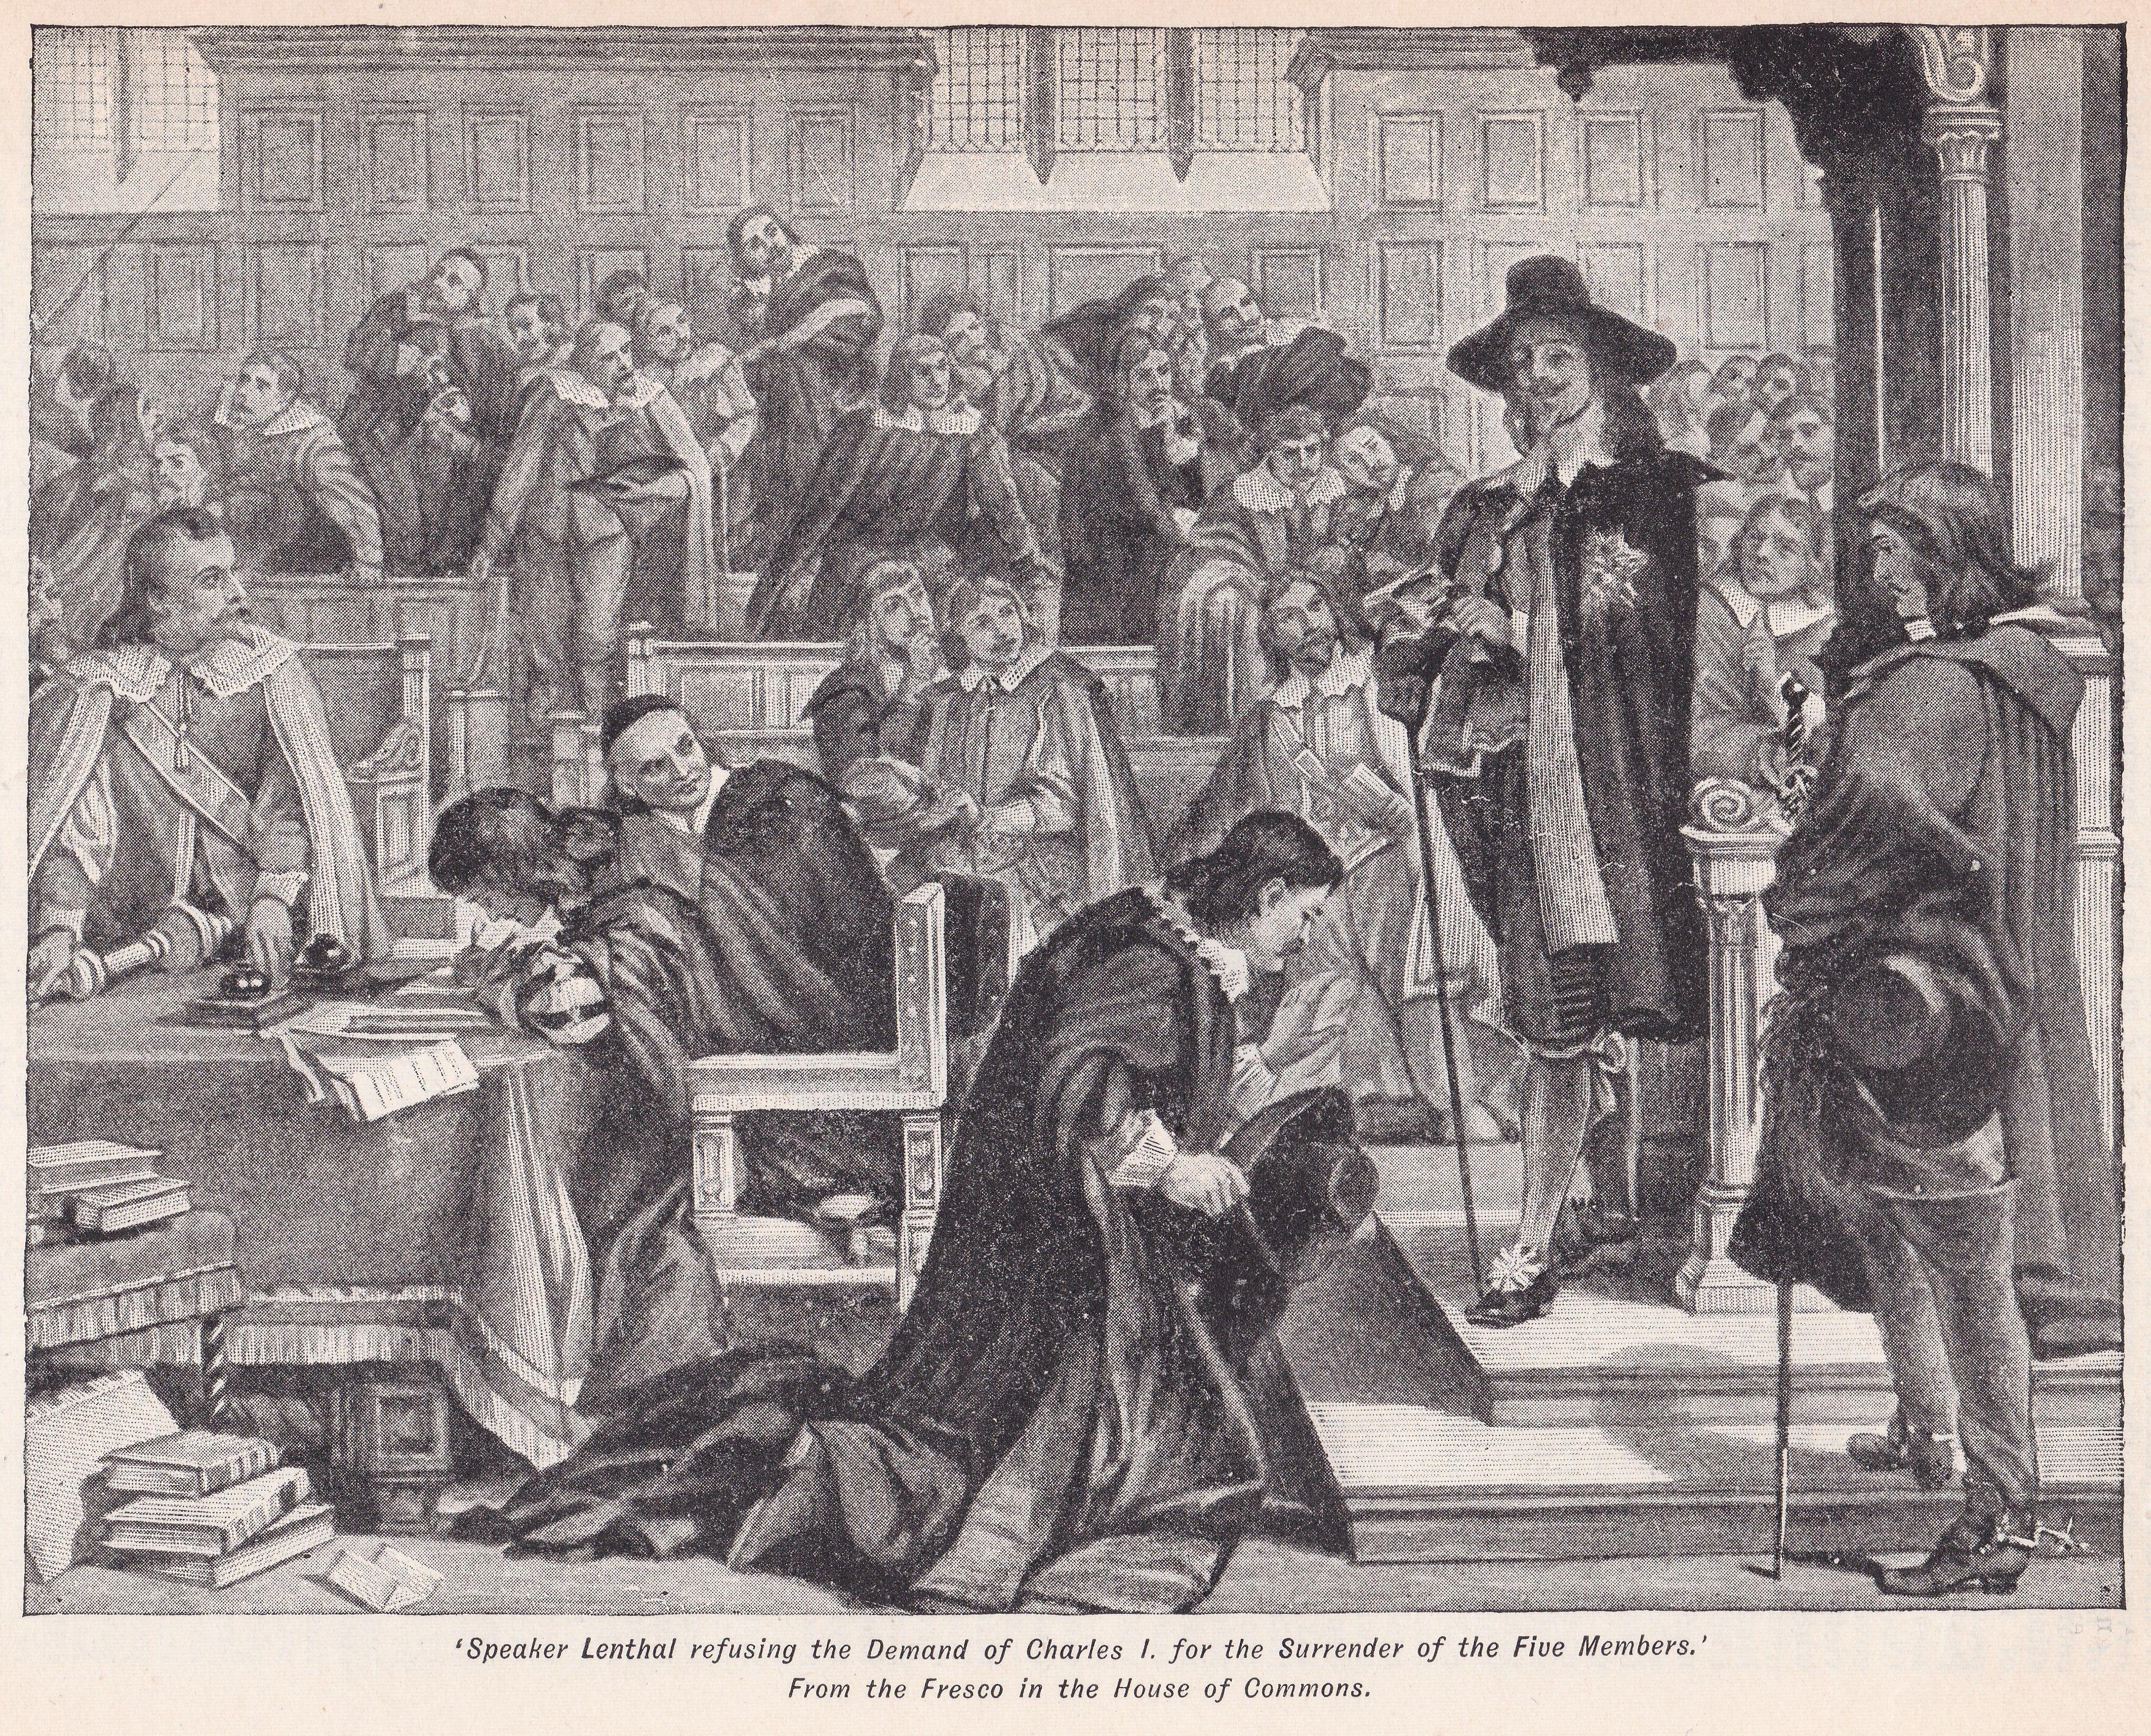 Speaker Lenthal refusing the Demand of Charles I for the Surrender of the Five Members